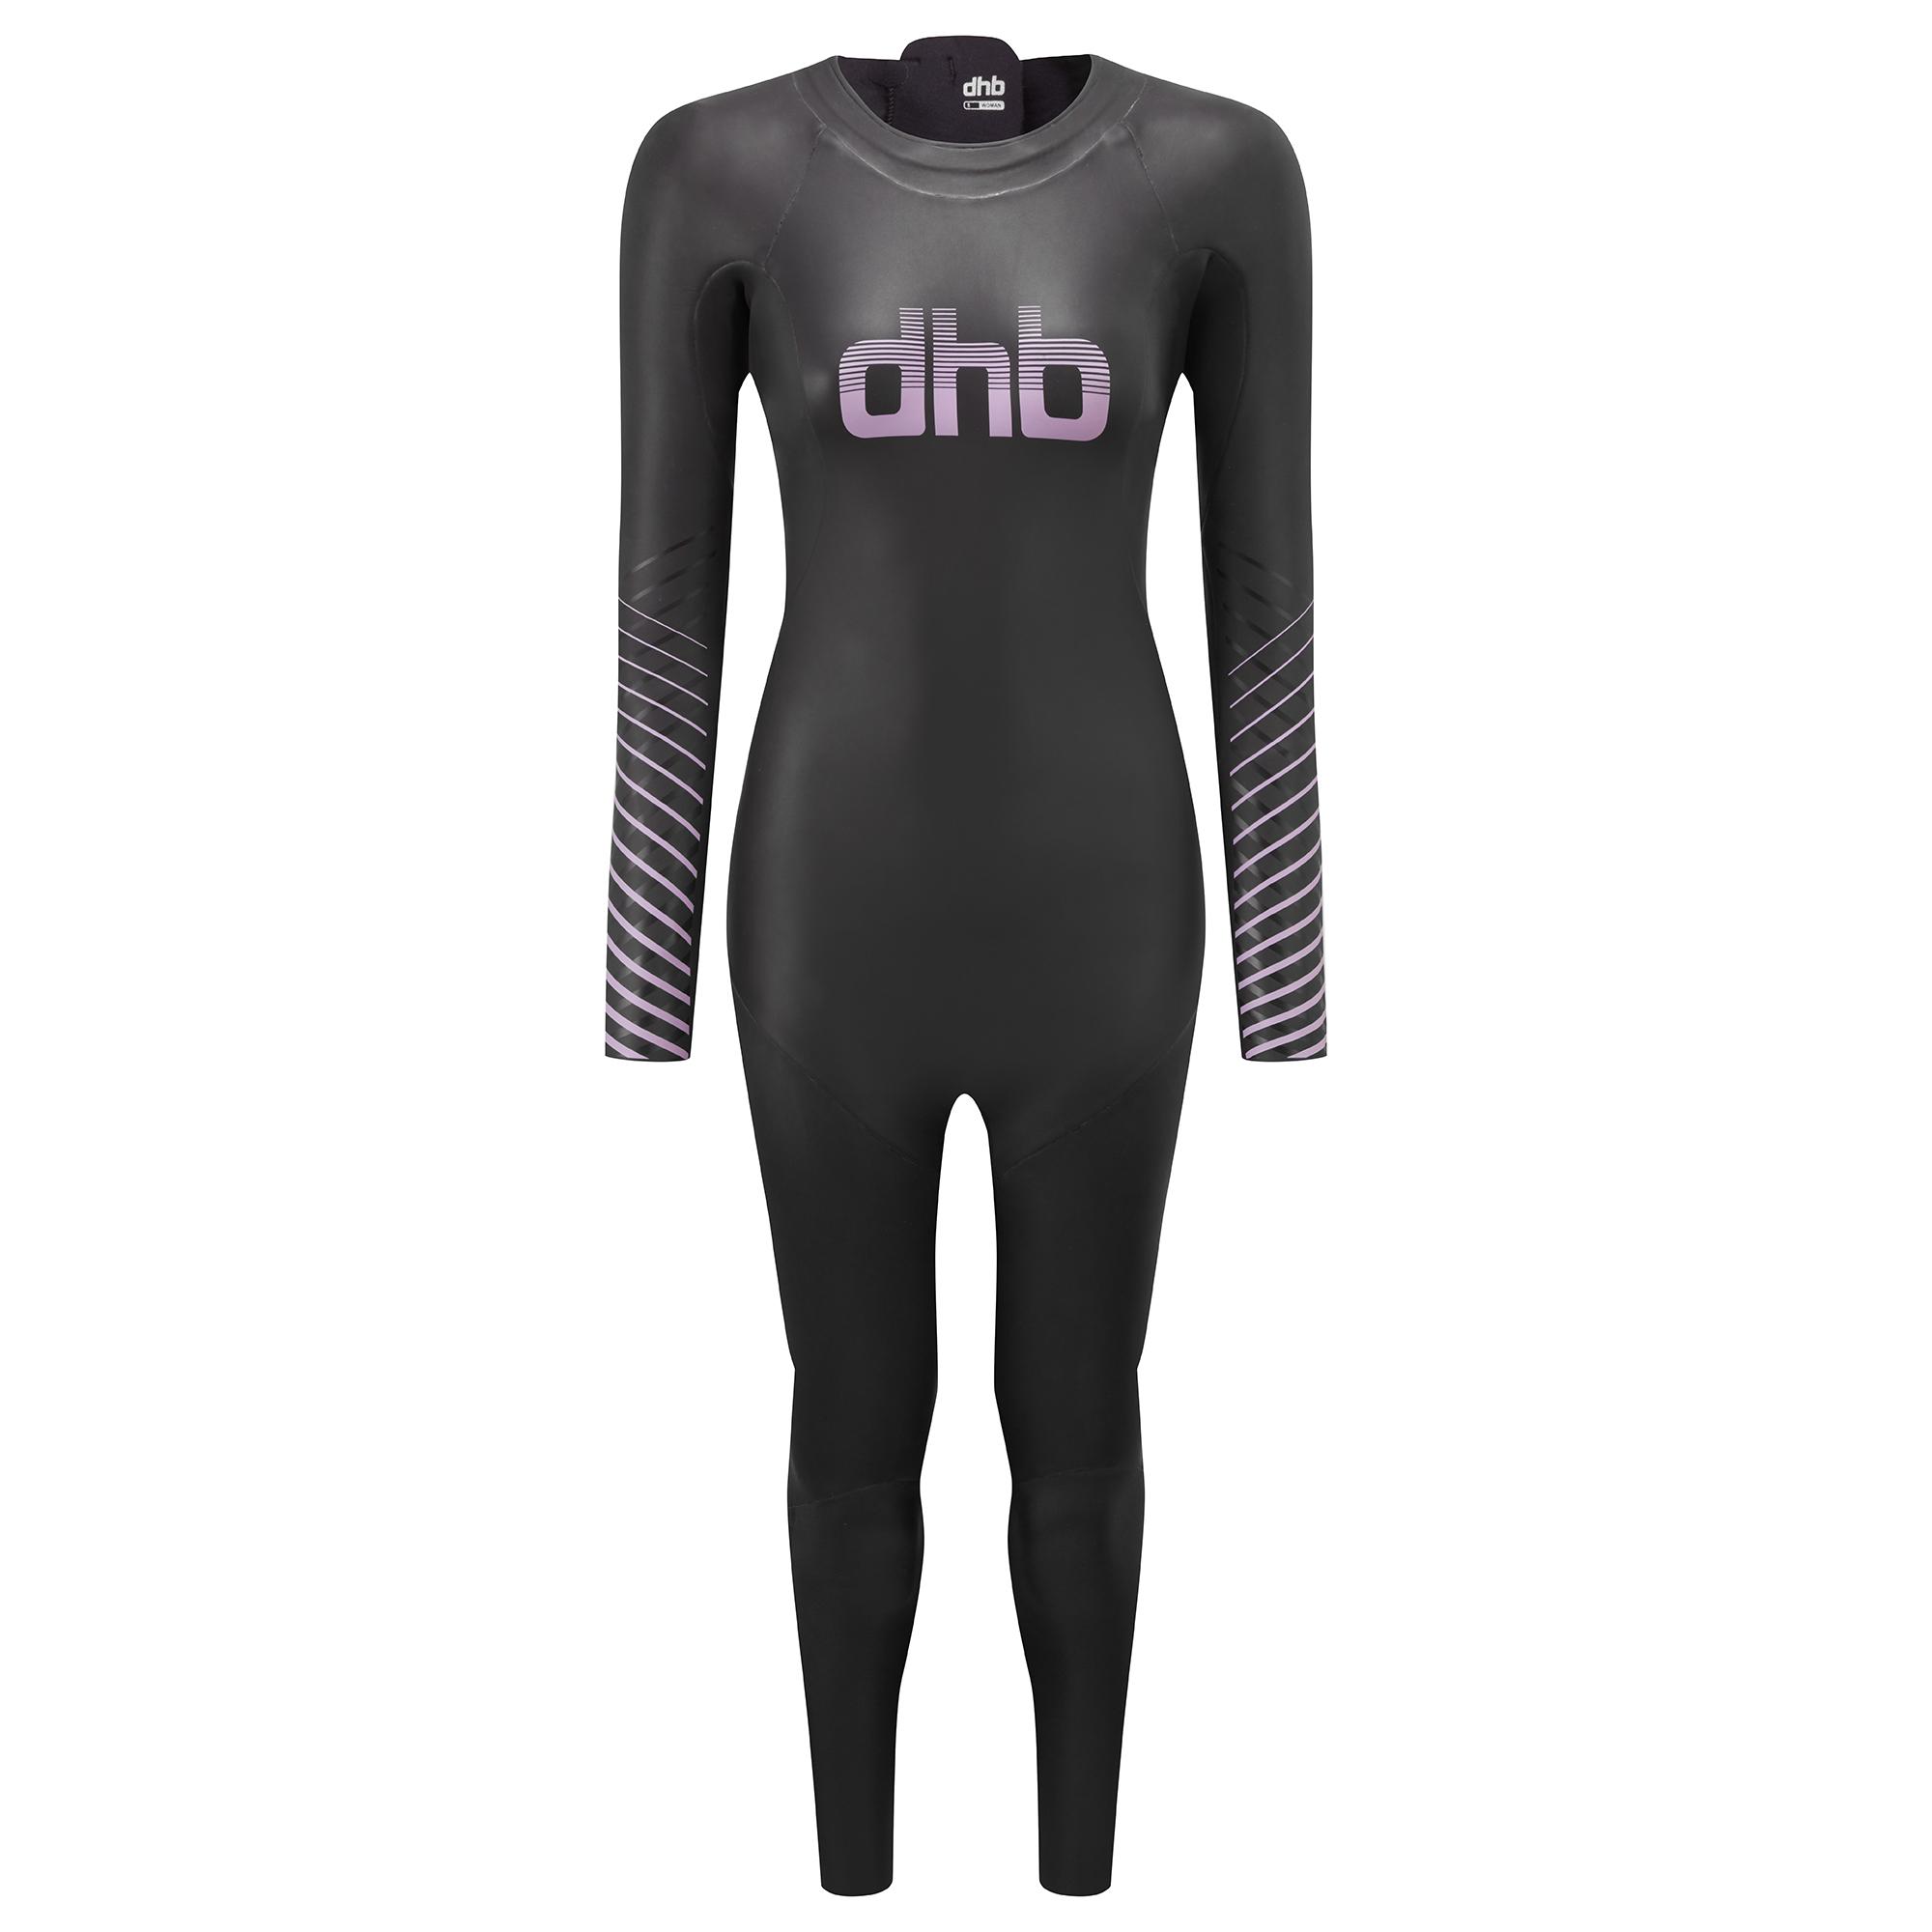 Dhb Hydron Womens Thermal Wetsuit - Black